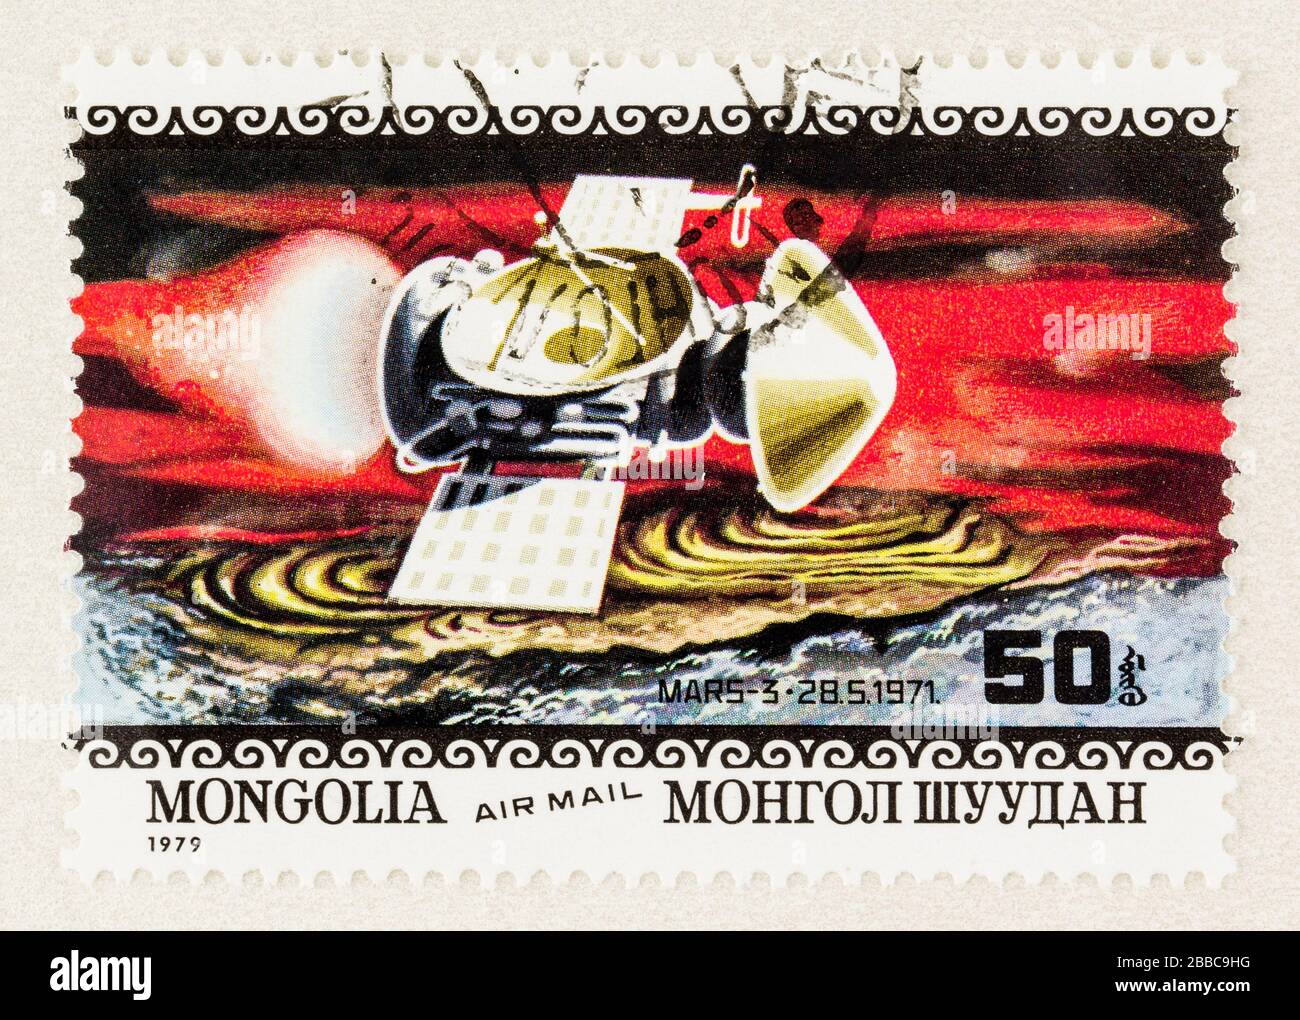 SEATTLE WASHINGTON - March 29, 2020: Close up of 1979 postage stamp from Mongolia commemorating the 1971 Mars-3  spacecraft missions to Mars. Stock Photo